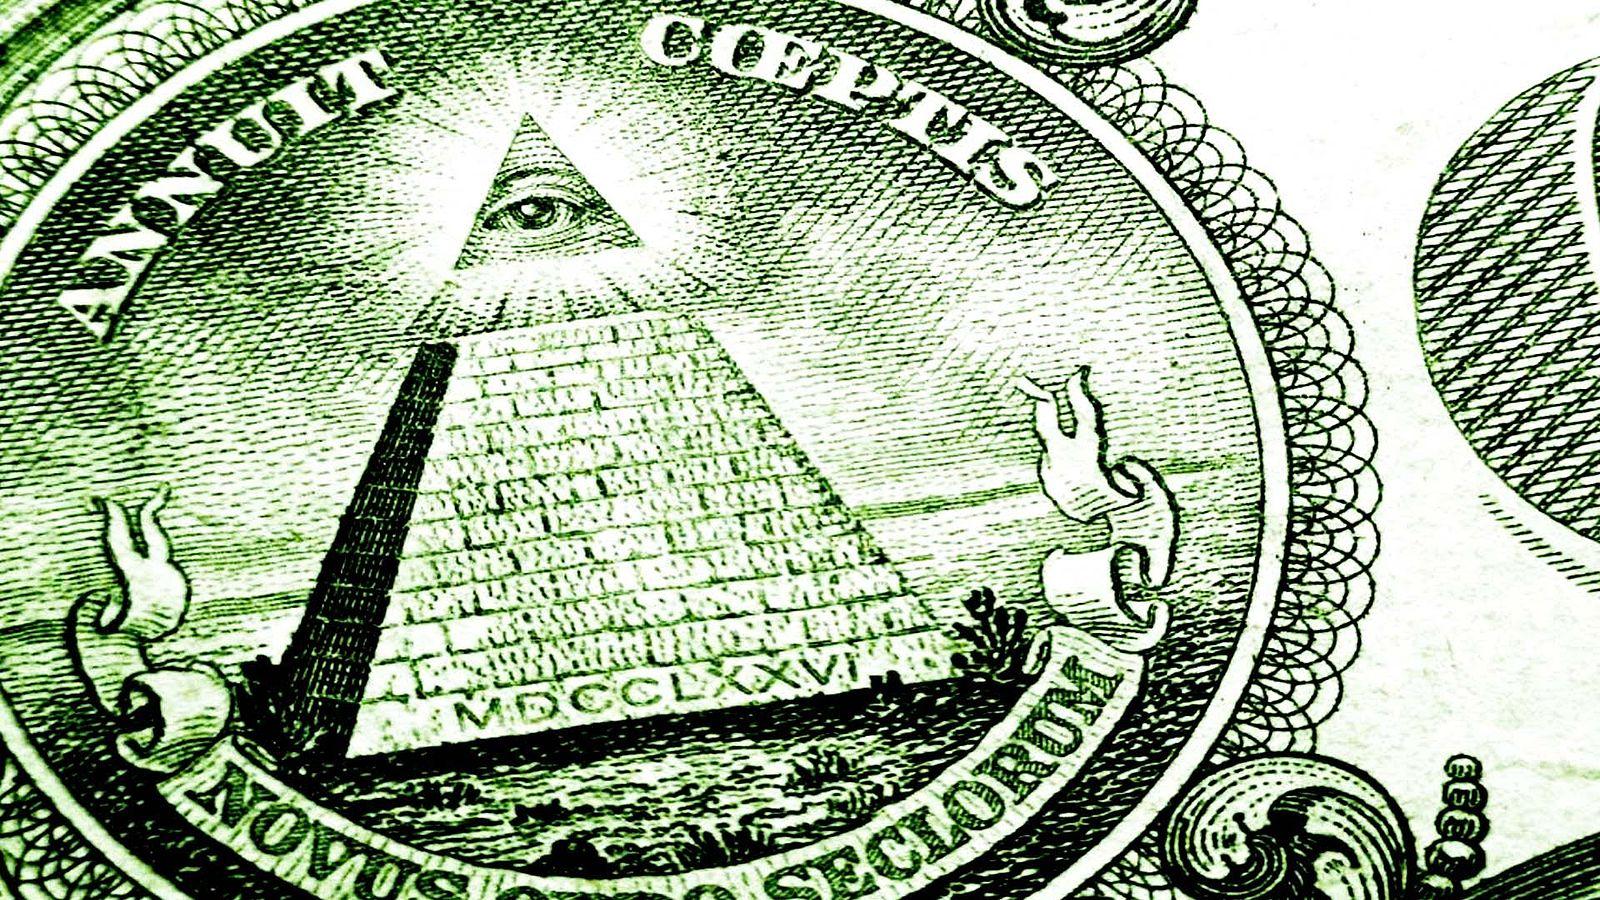 Conspiracy Theorist in Chief: An Interview with Michael Barkun